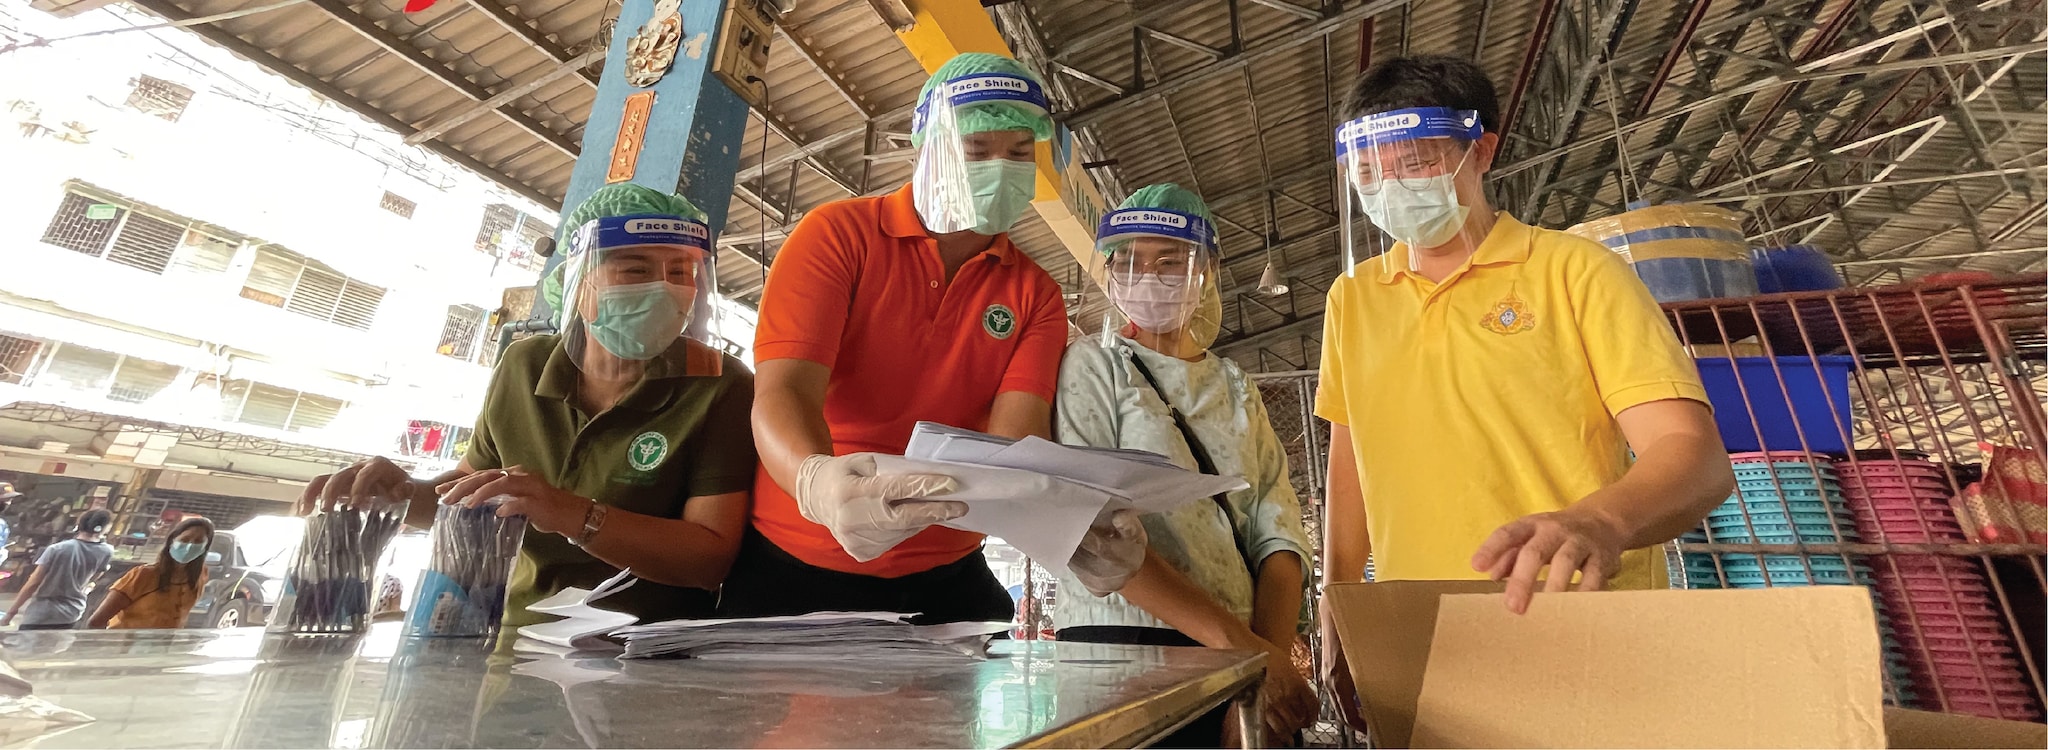 Dr. Ern and other Thai investigators prepare a questionnaire for Myanmar migrants at the shrimp market.